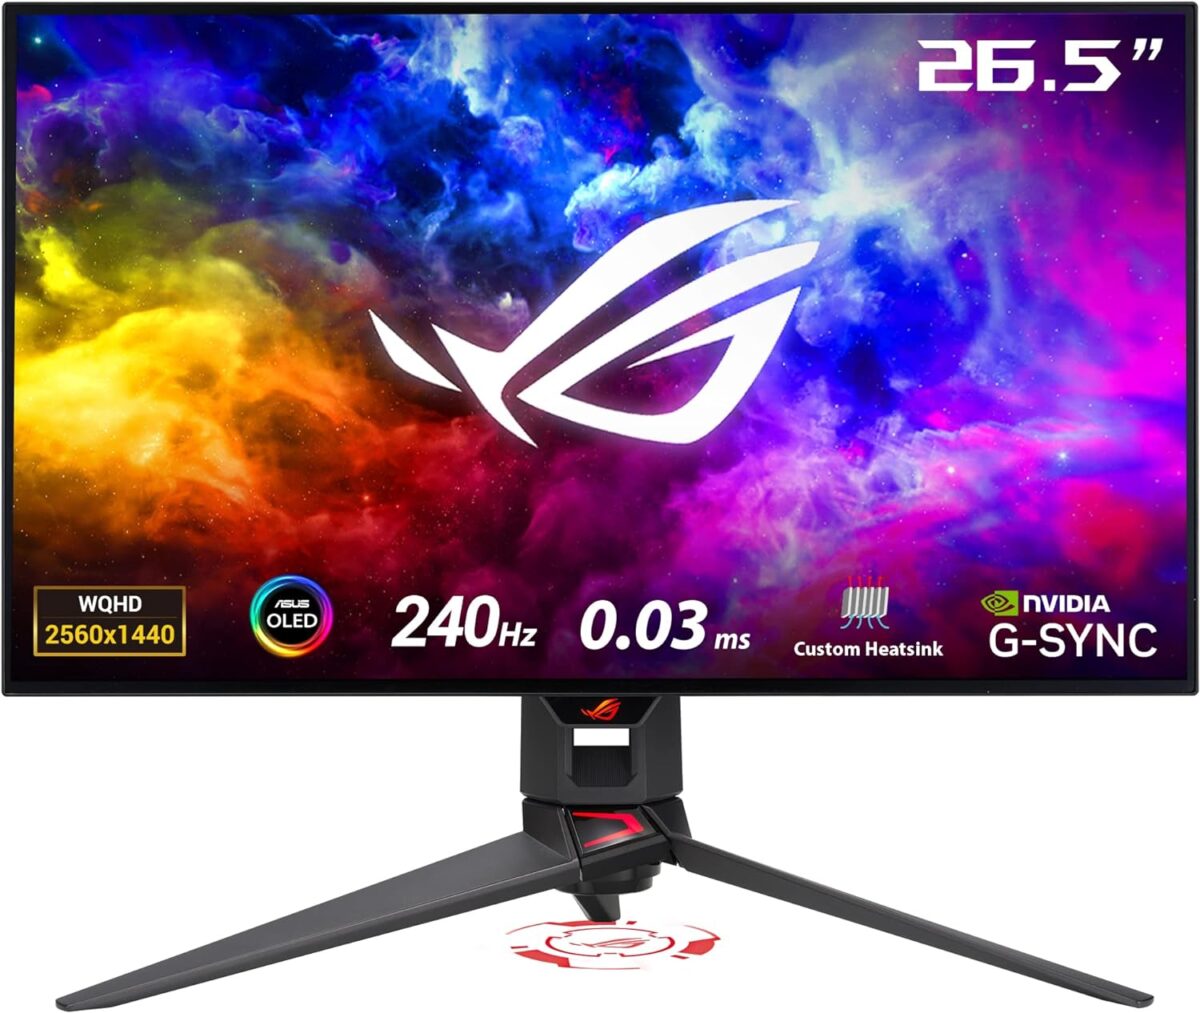 ASUS ROG Swift 27 inch OLED price in Pakistan PG27AQDM gamimg monitor